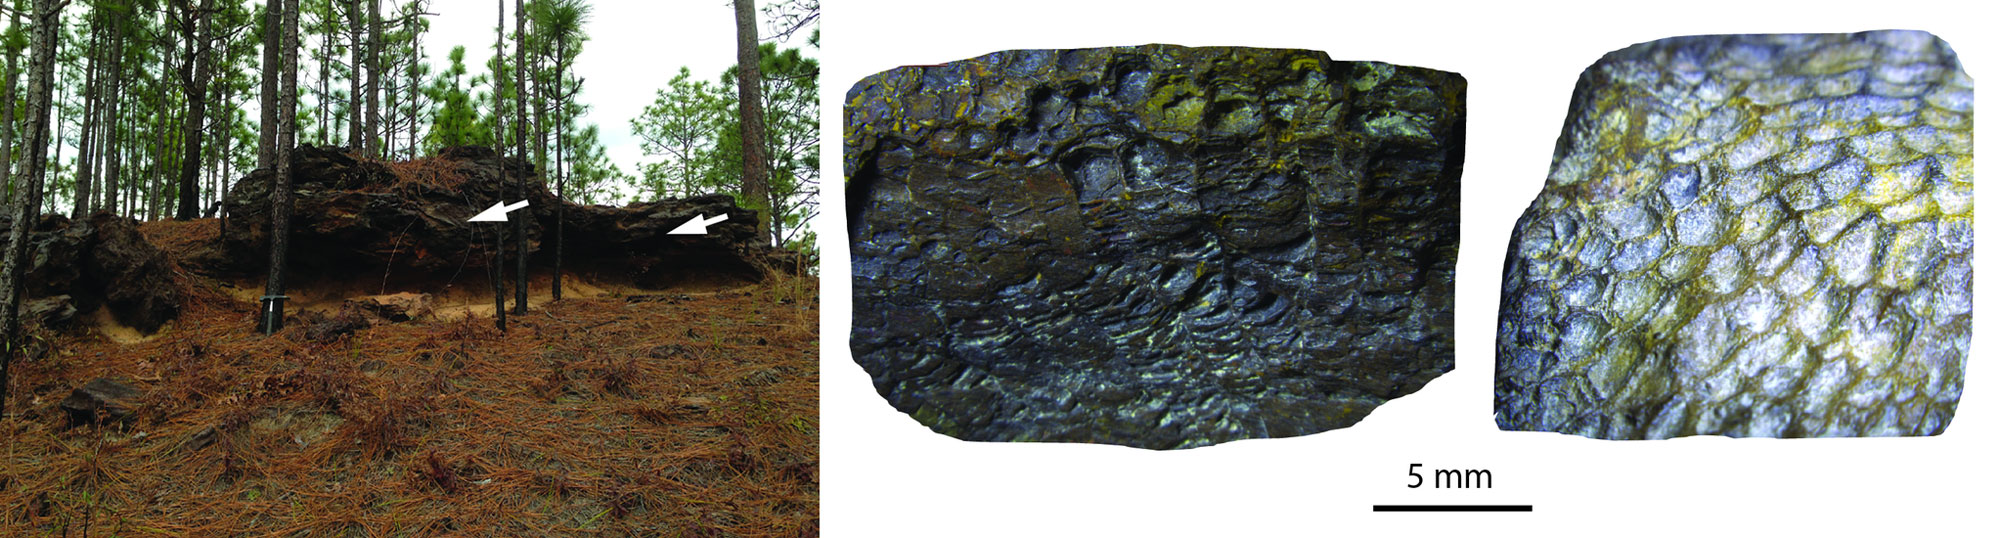 2-Panel figure. Panel 1: Outcrops of rock bearing Ordovician to Silurian fossil corals, South Carolina. Panel 2: Photos of two tabulate coral specimens, Ordovician to Silurian, South Carolina.